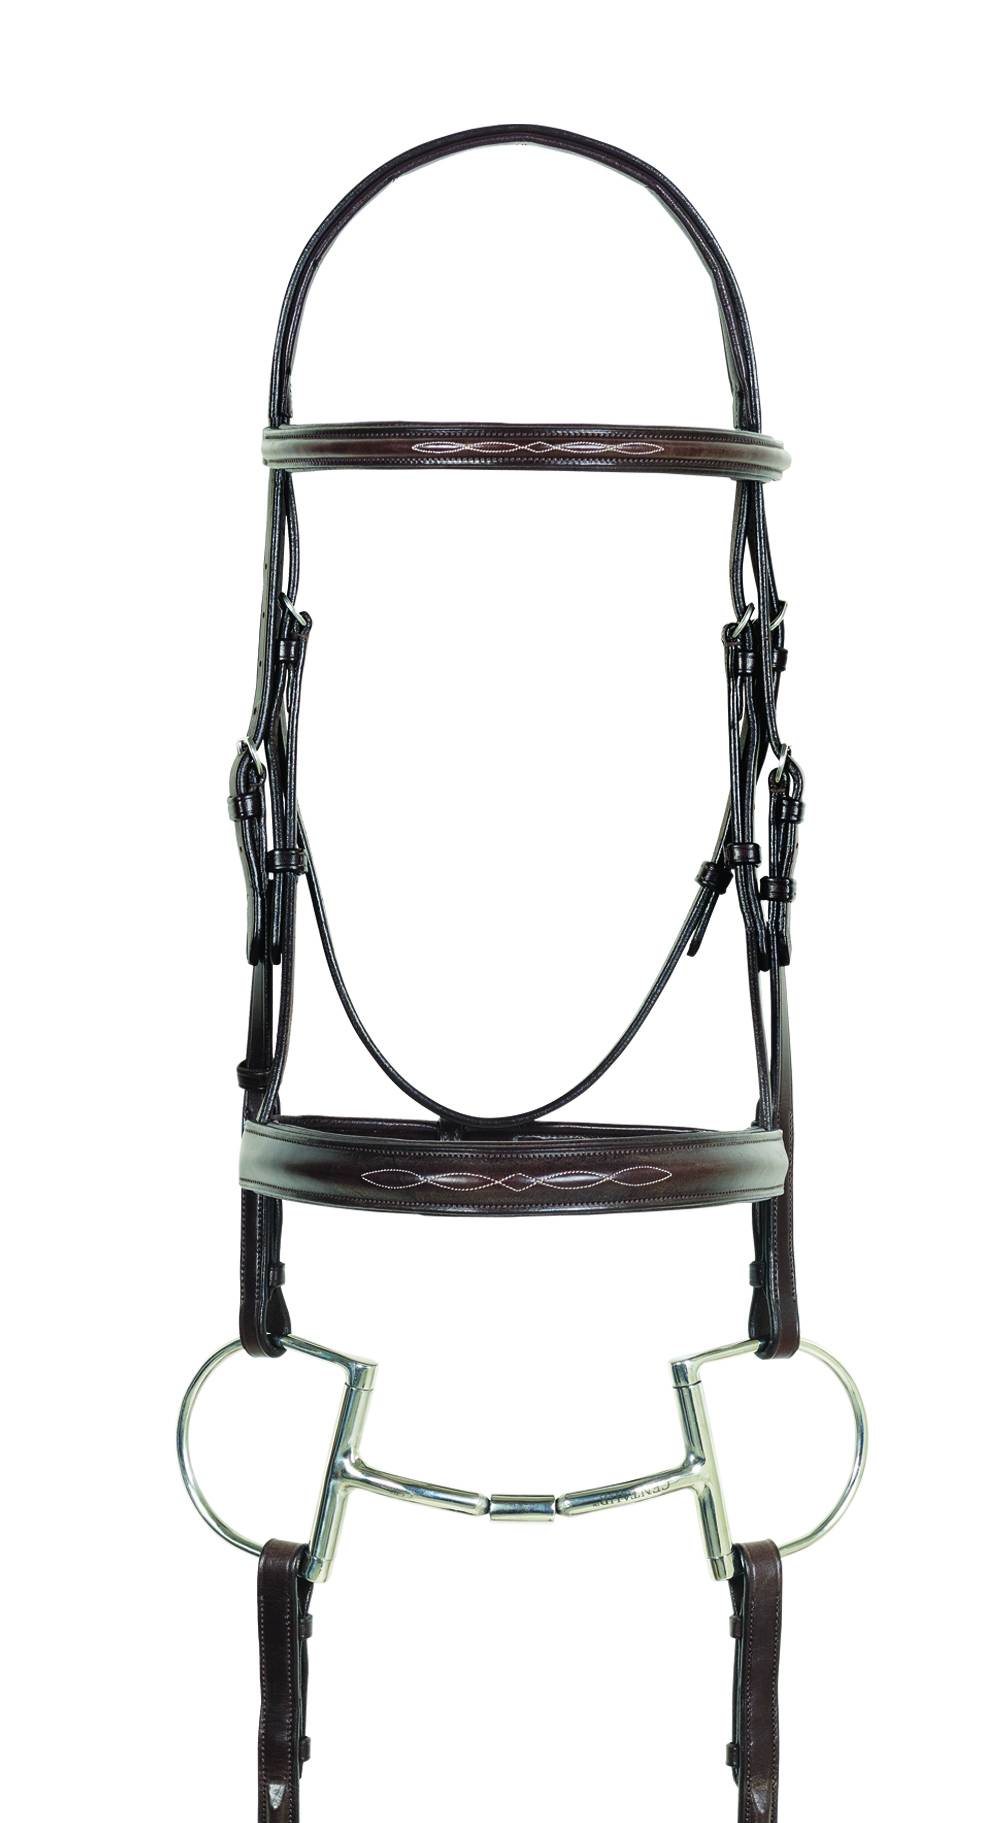 Camelot Fancy Stitched Round Wide Padded Monocrown Bridle with Reins